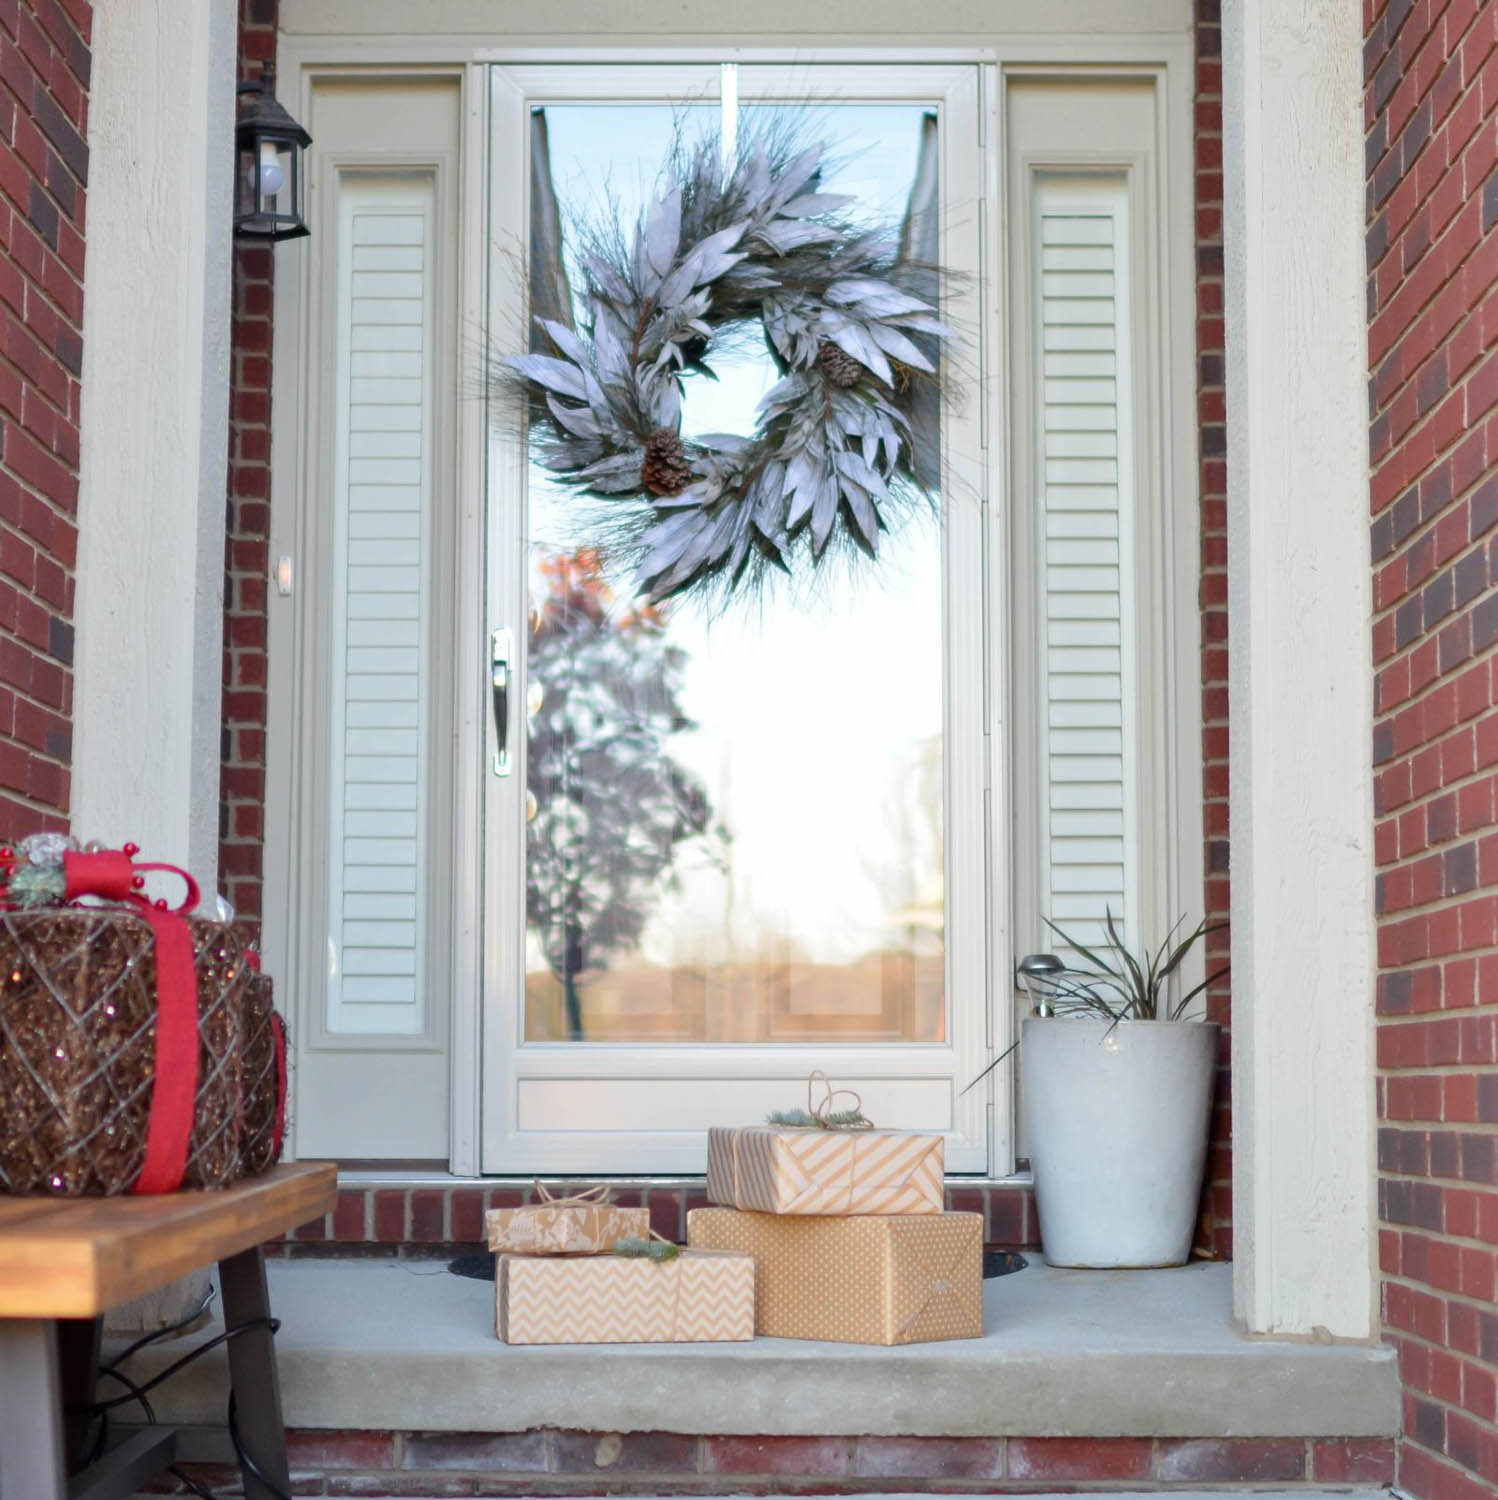 Porch Pirates: What to do if Caught Stealing Packages this Holiday Season in South Florida – Criminal Defense Attorney talks Package Theft Consequences